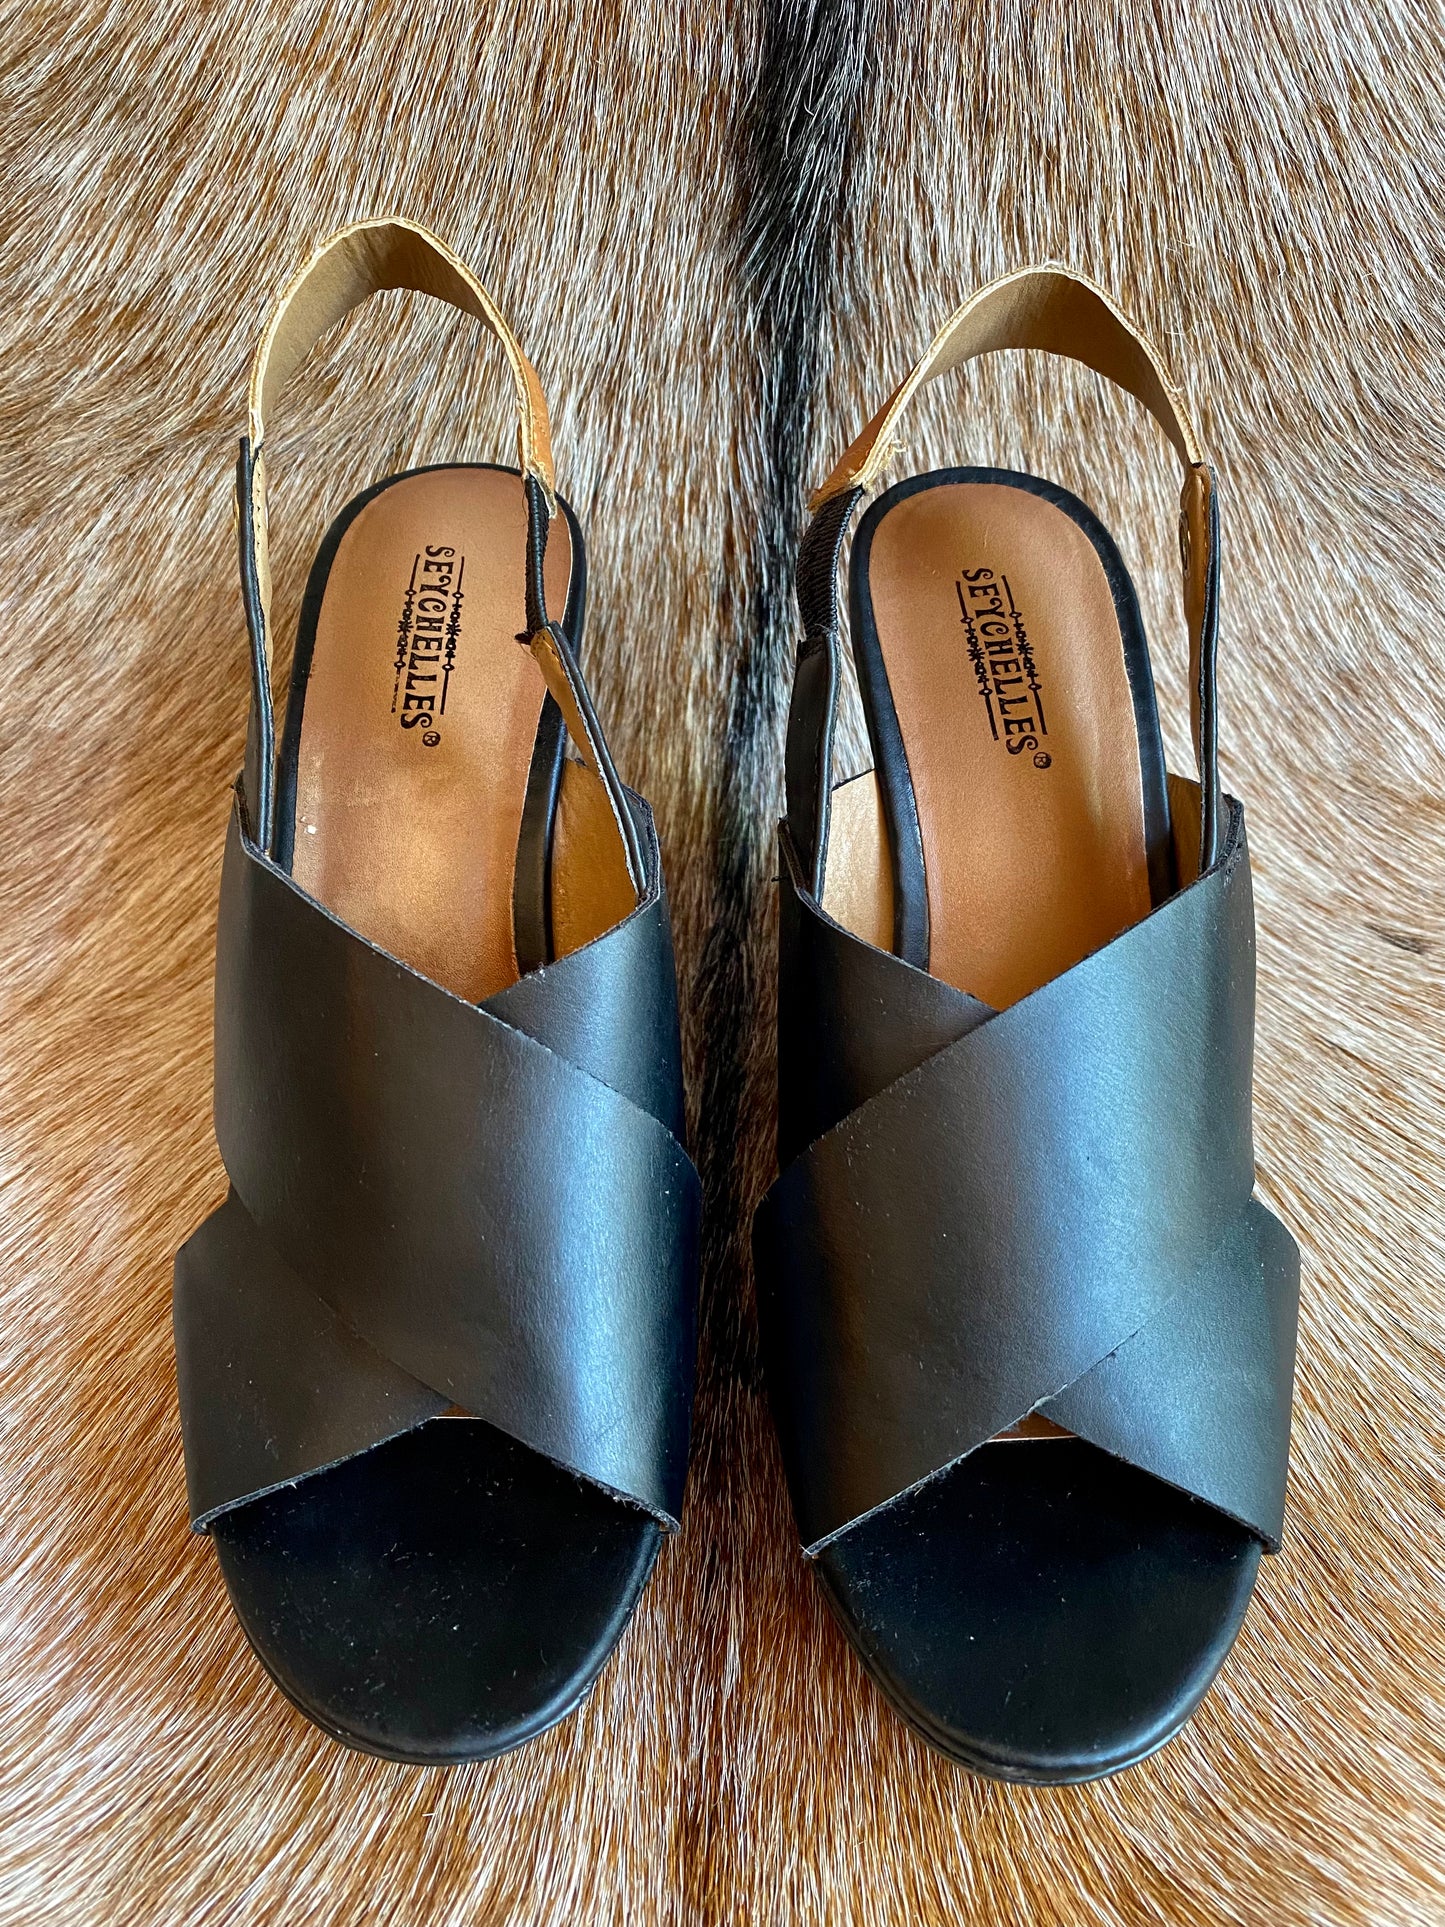 Black & Tan Leather Thick Strap Wedges